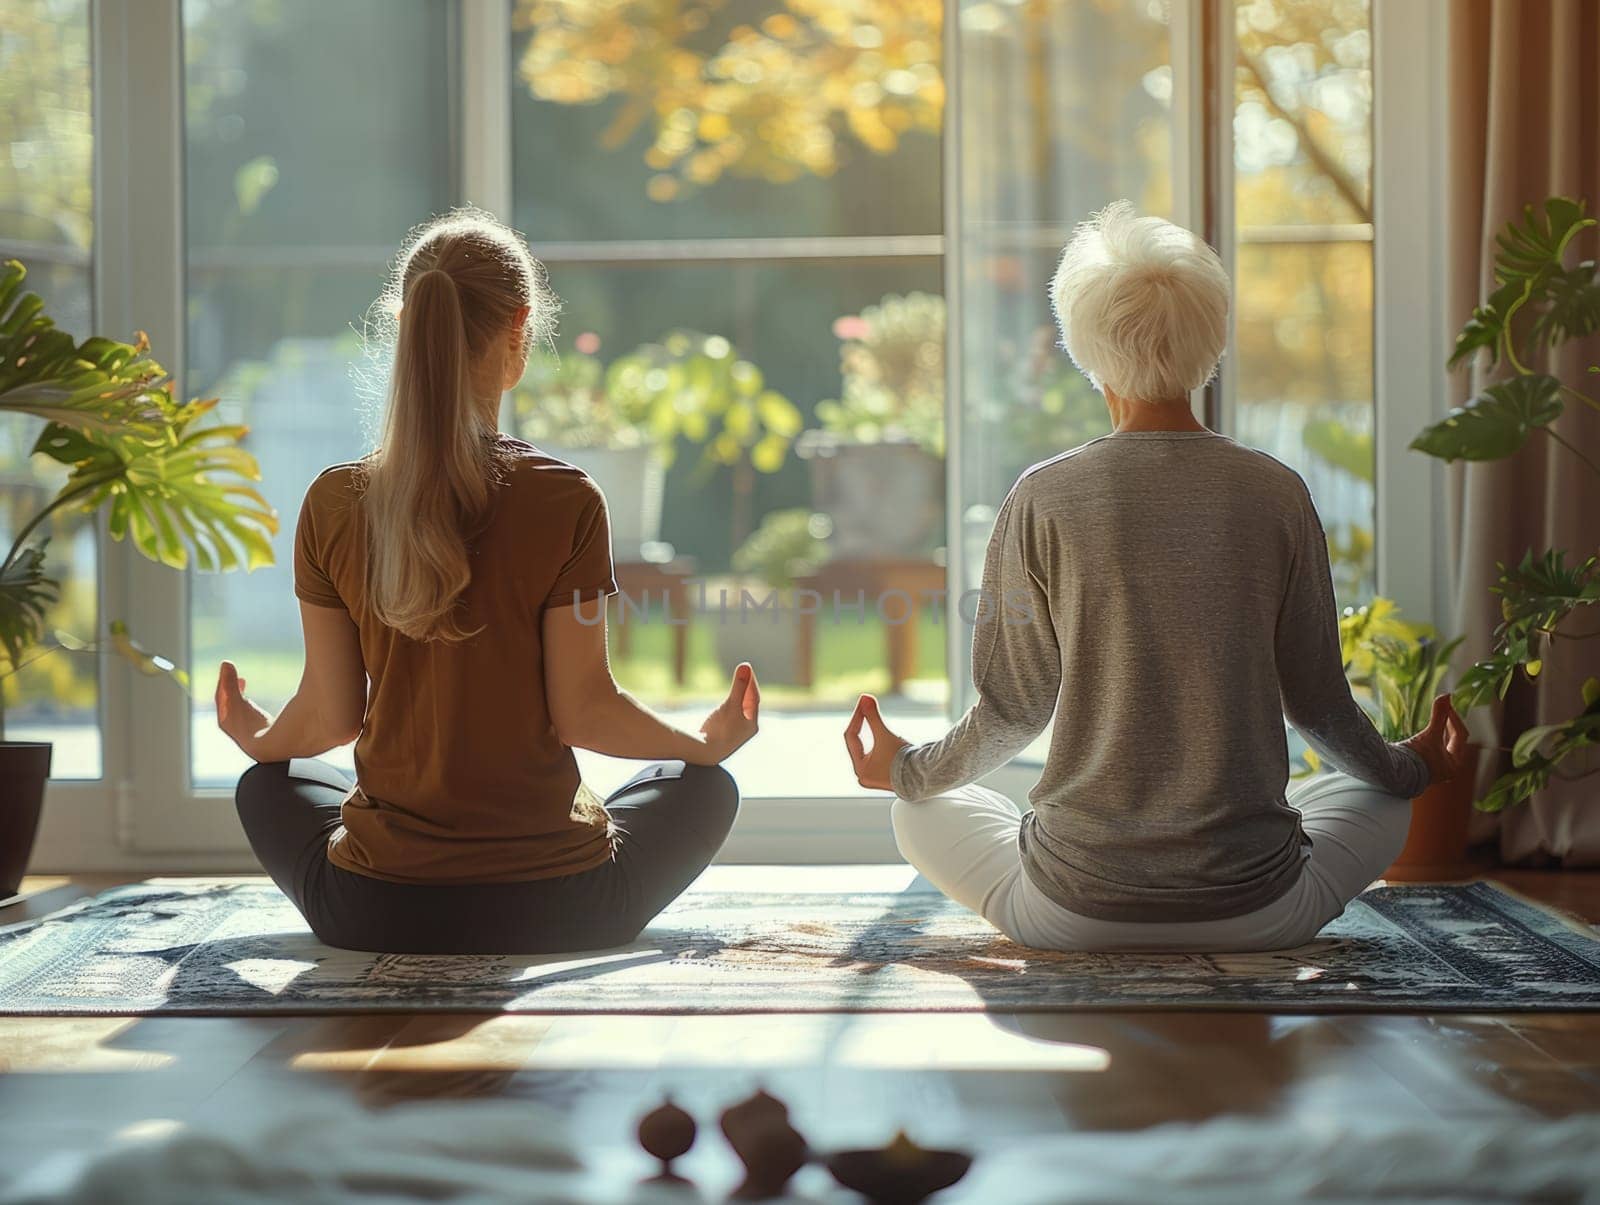 Mature Couple is Practicing Yoga. Happy Healthy People, Wellbeing Concept. by iliris